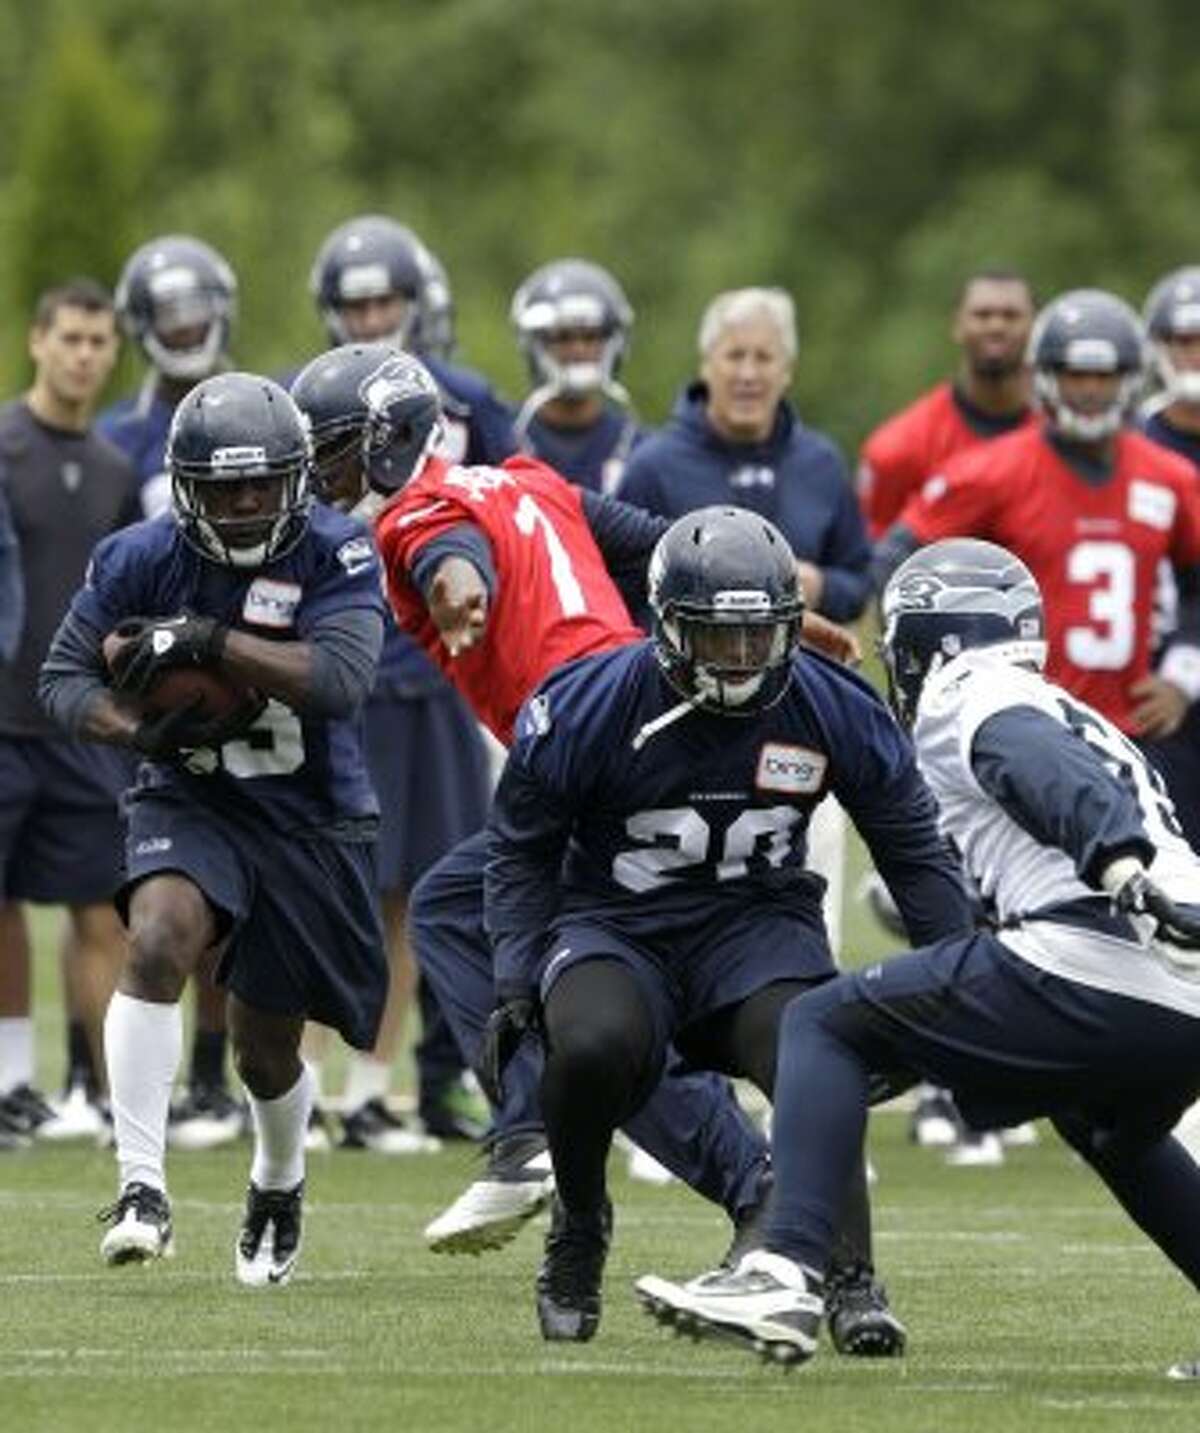 Seattle Seahawks' Leon Washington, left, takes a handoff from quarterback Tavaris Jackson, second from left, as Kregg Lupkin (20) squares off to block Heath Farwell, right, during practice Thursday, June 14, 2012, in Renton. (Ted S. Warren / Associated Press)